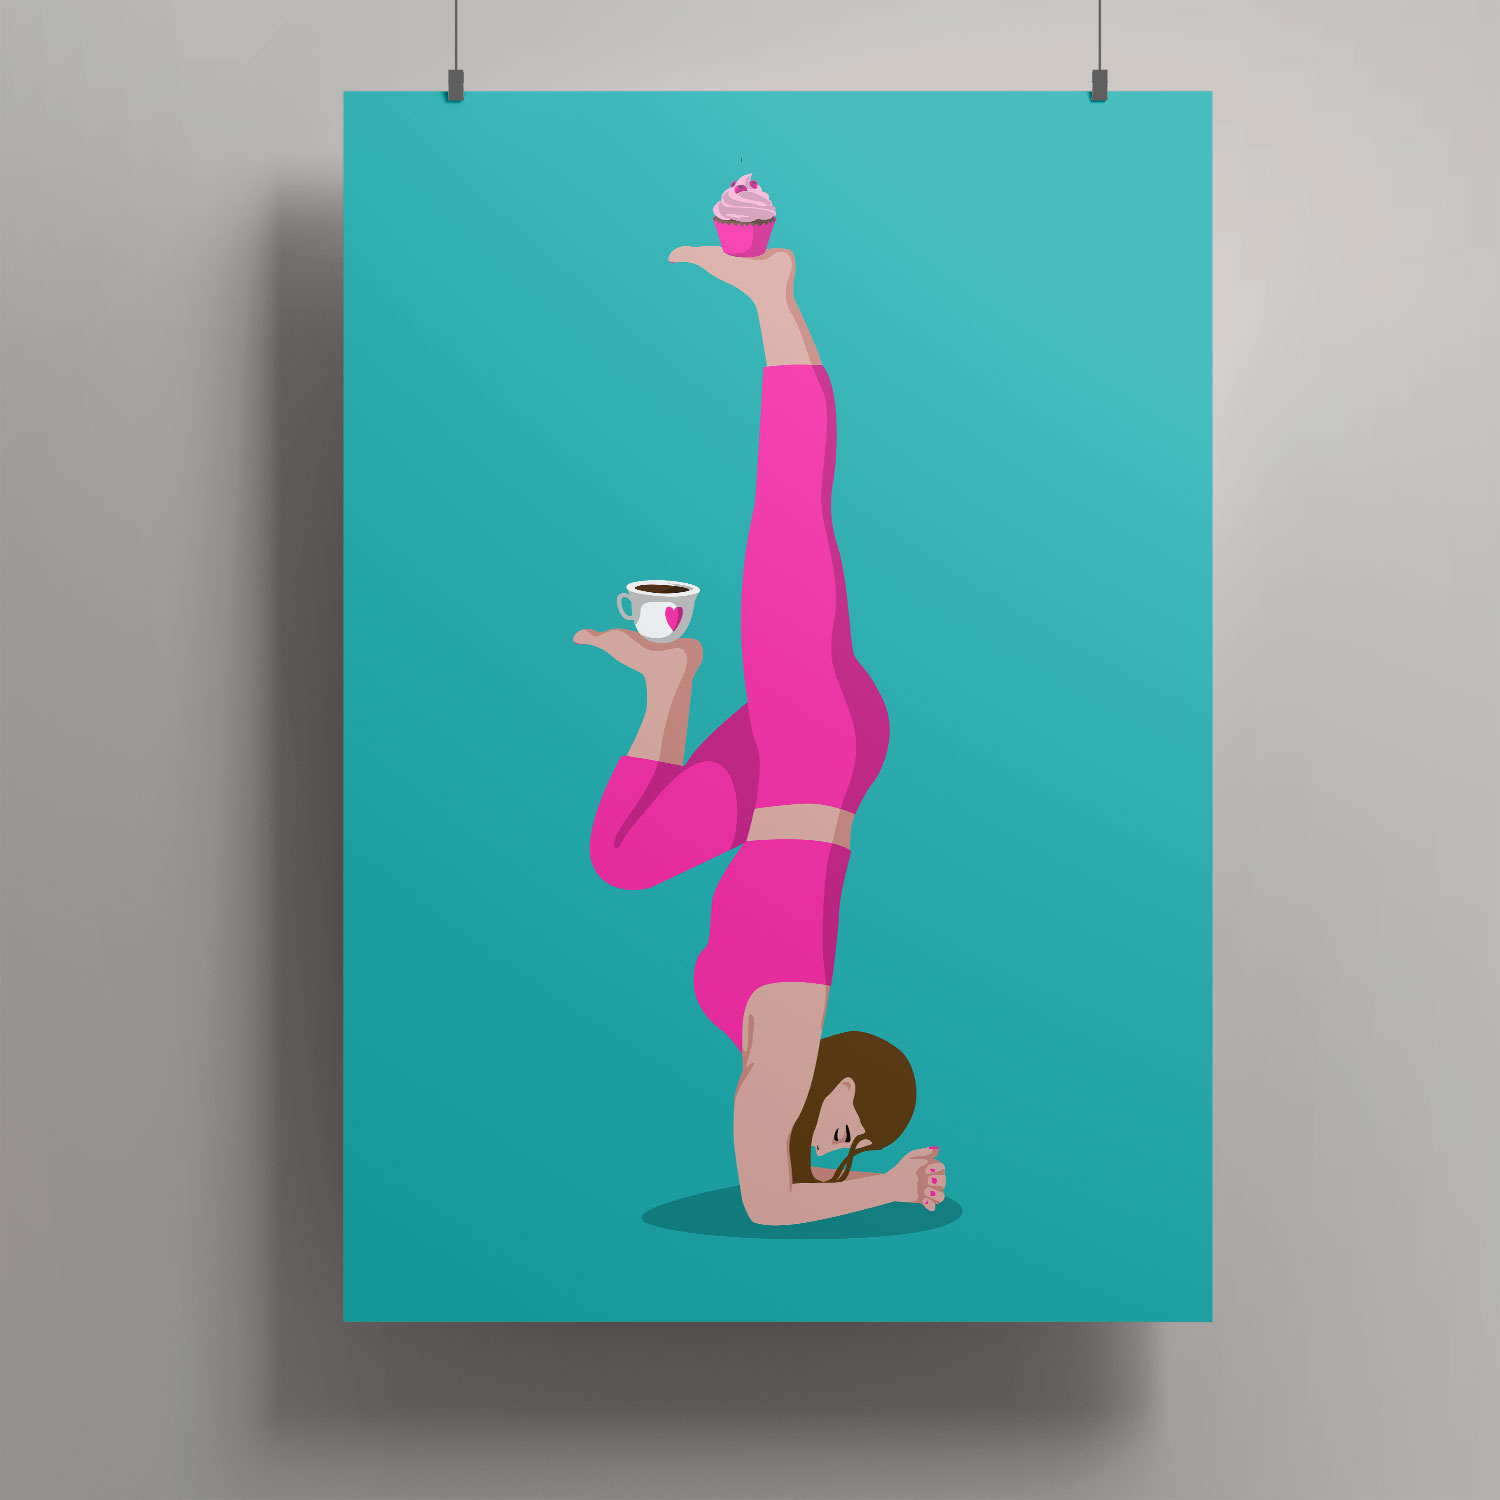 Artprint A3 - Yogastand with coffee